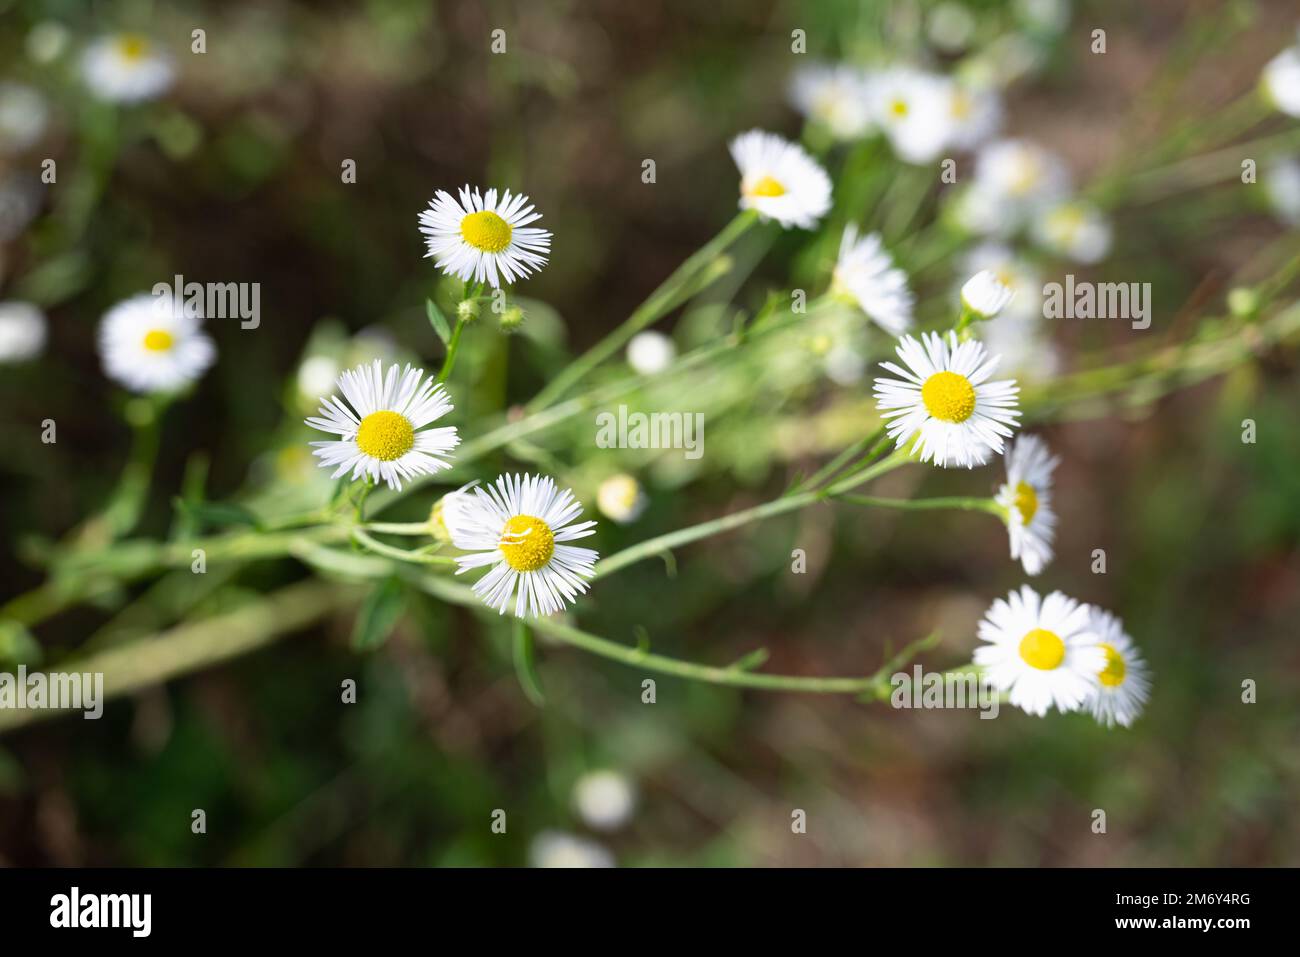 close-up photograph of several daisy flowers. Summer concept Stock Photo